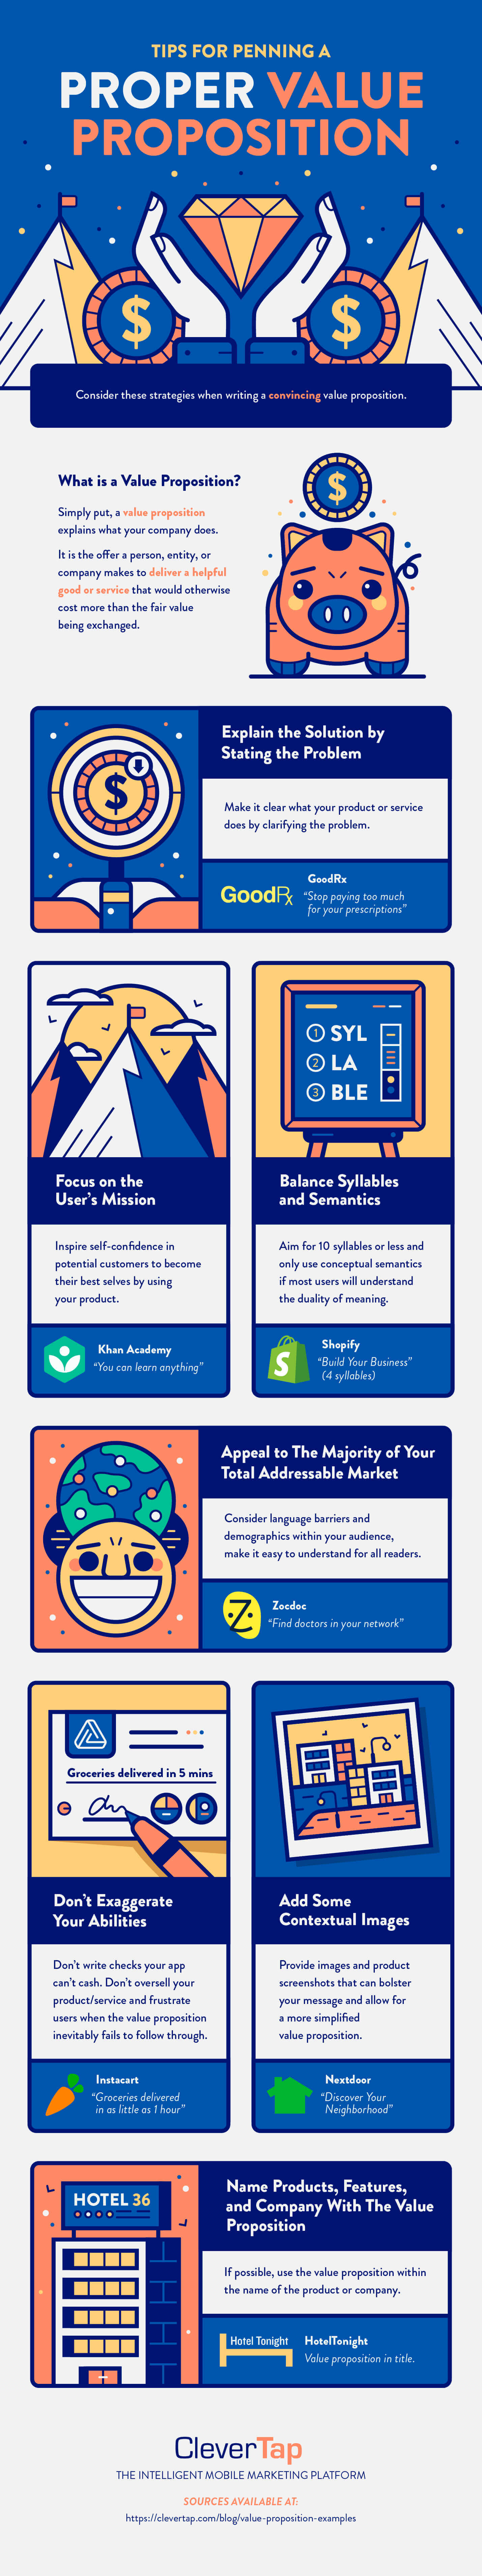 value propositions example infographic with tips from billion dollar companies